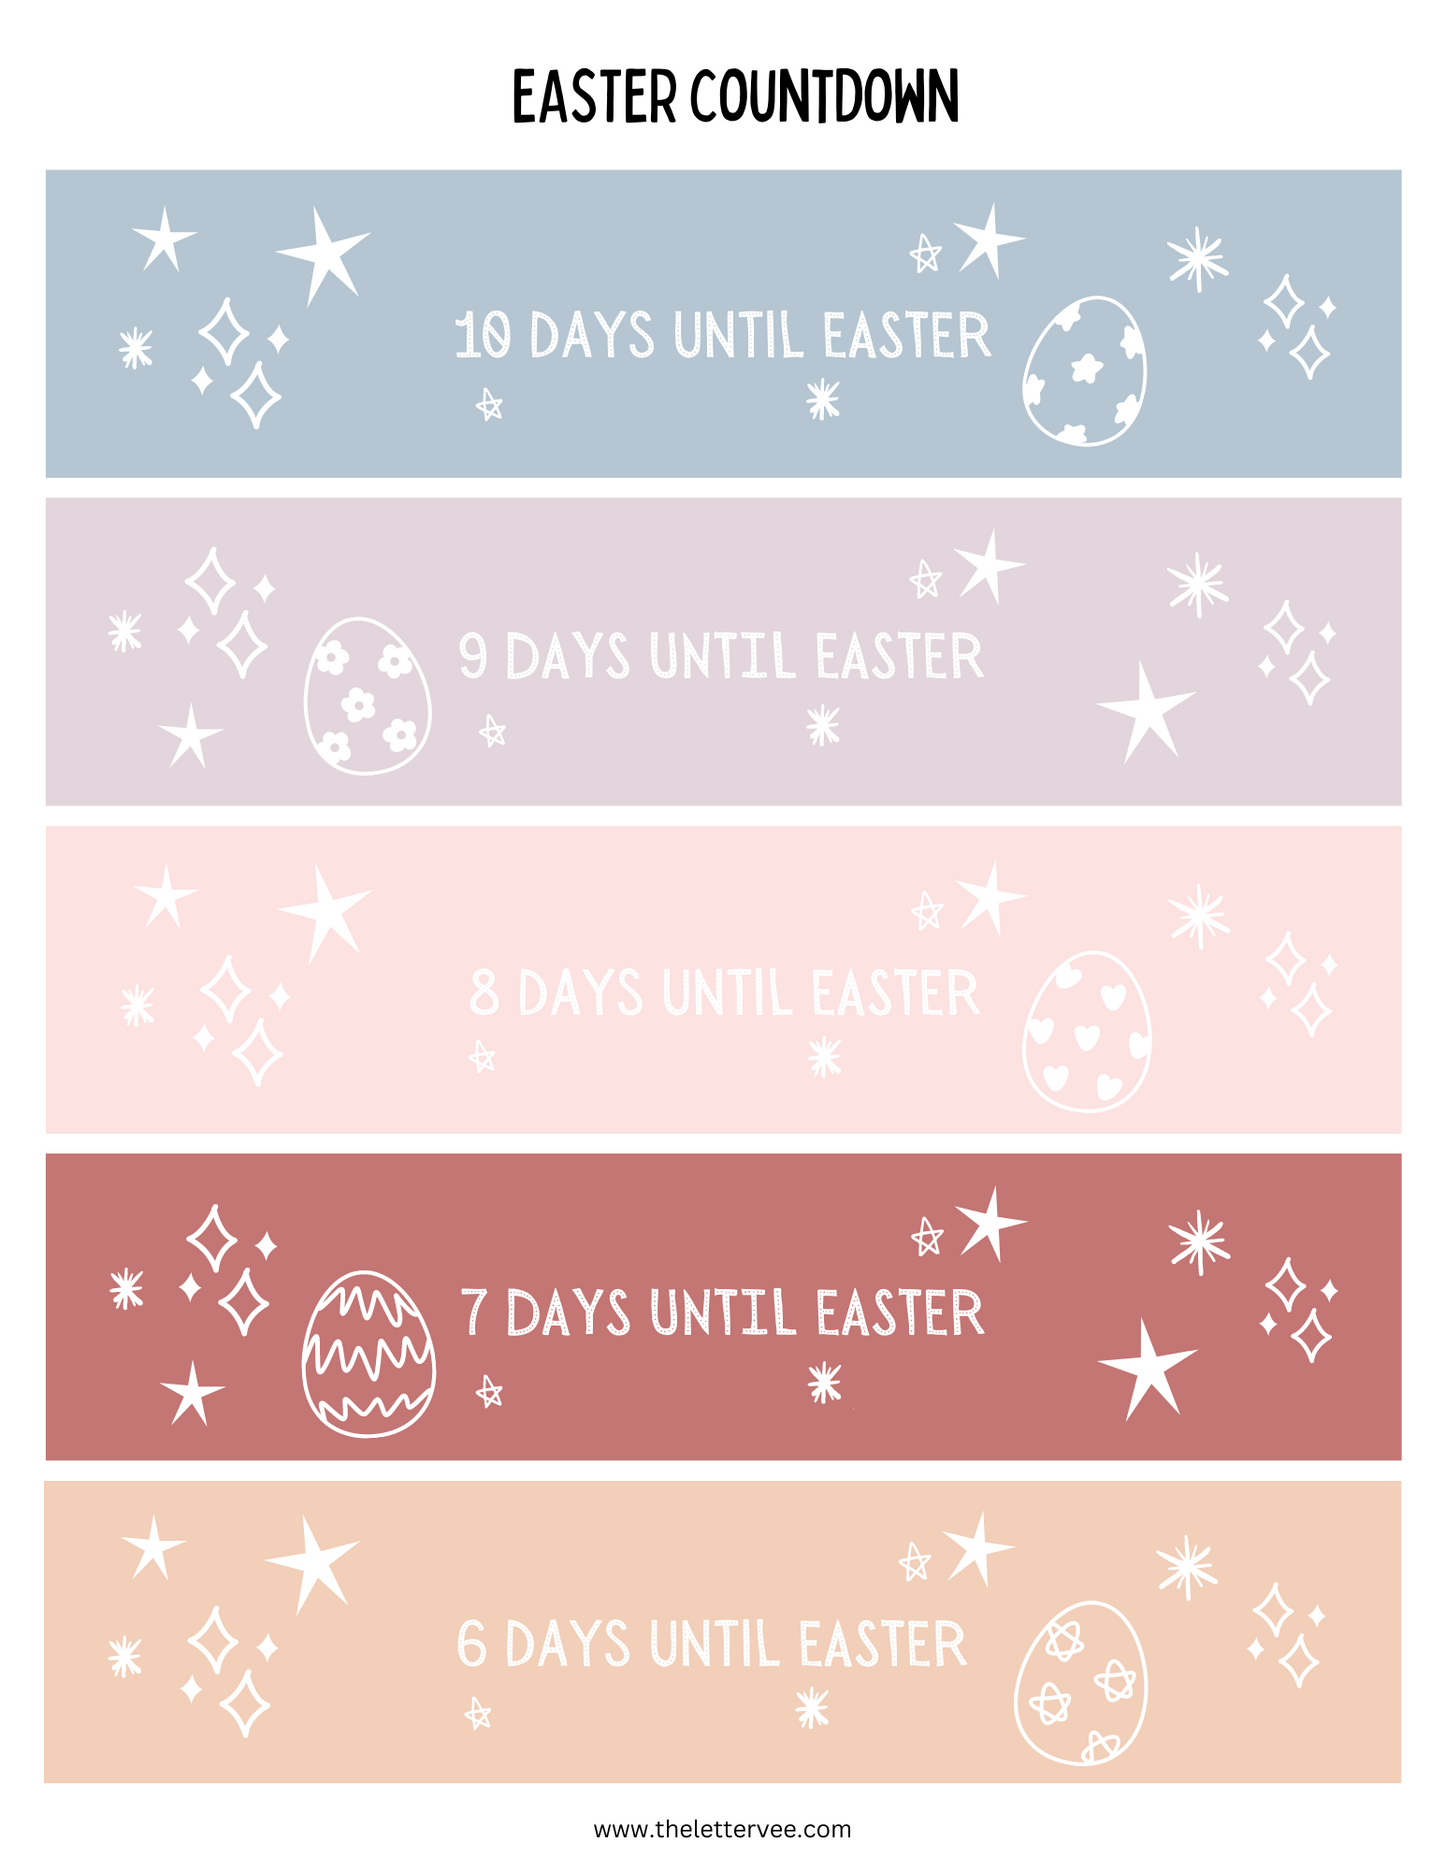 Paper Chain Countdown | Easter